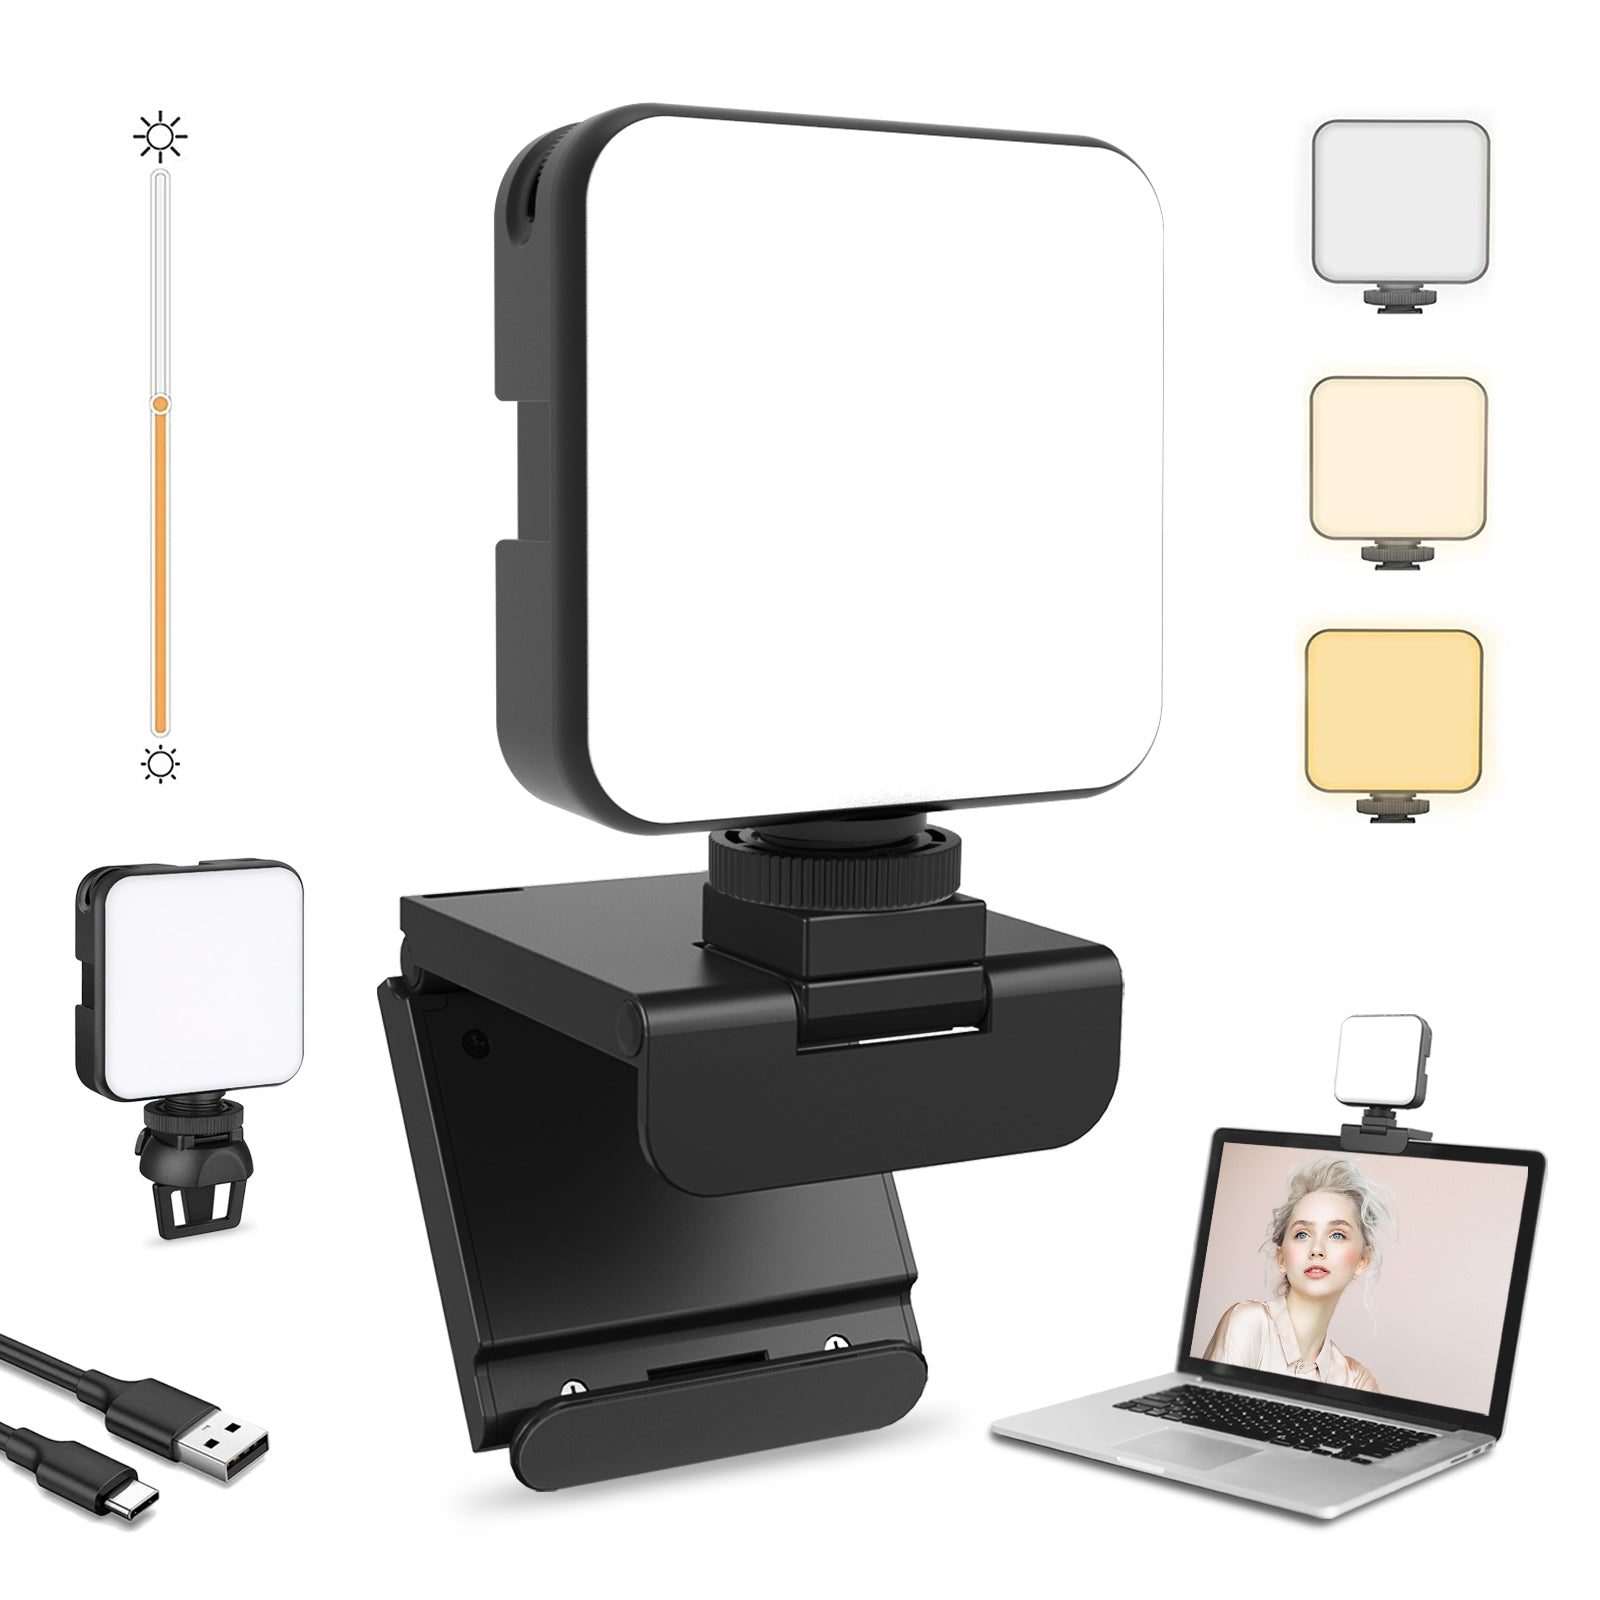 NexiGo Video Conference Lighting Kit, Dimmable & Rechargeable Glow Light with Clip